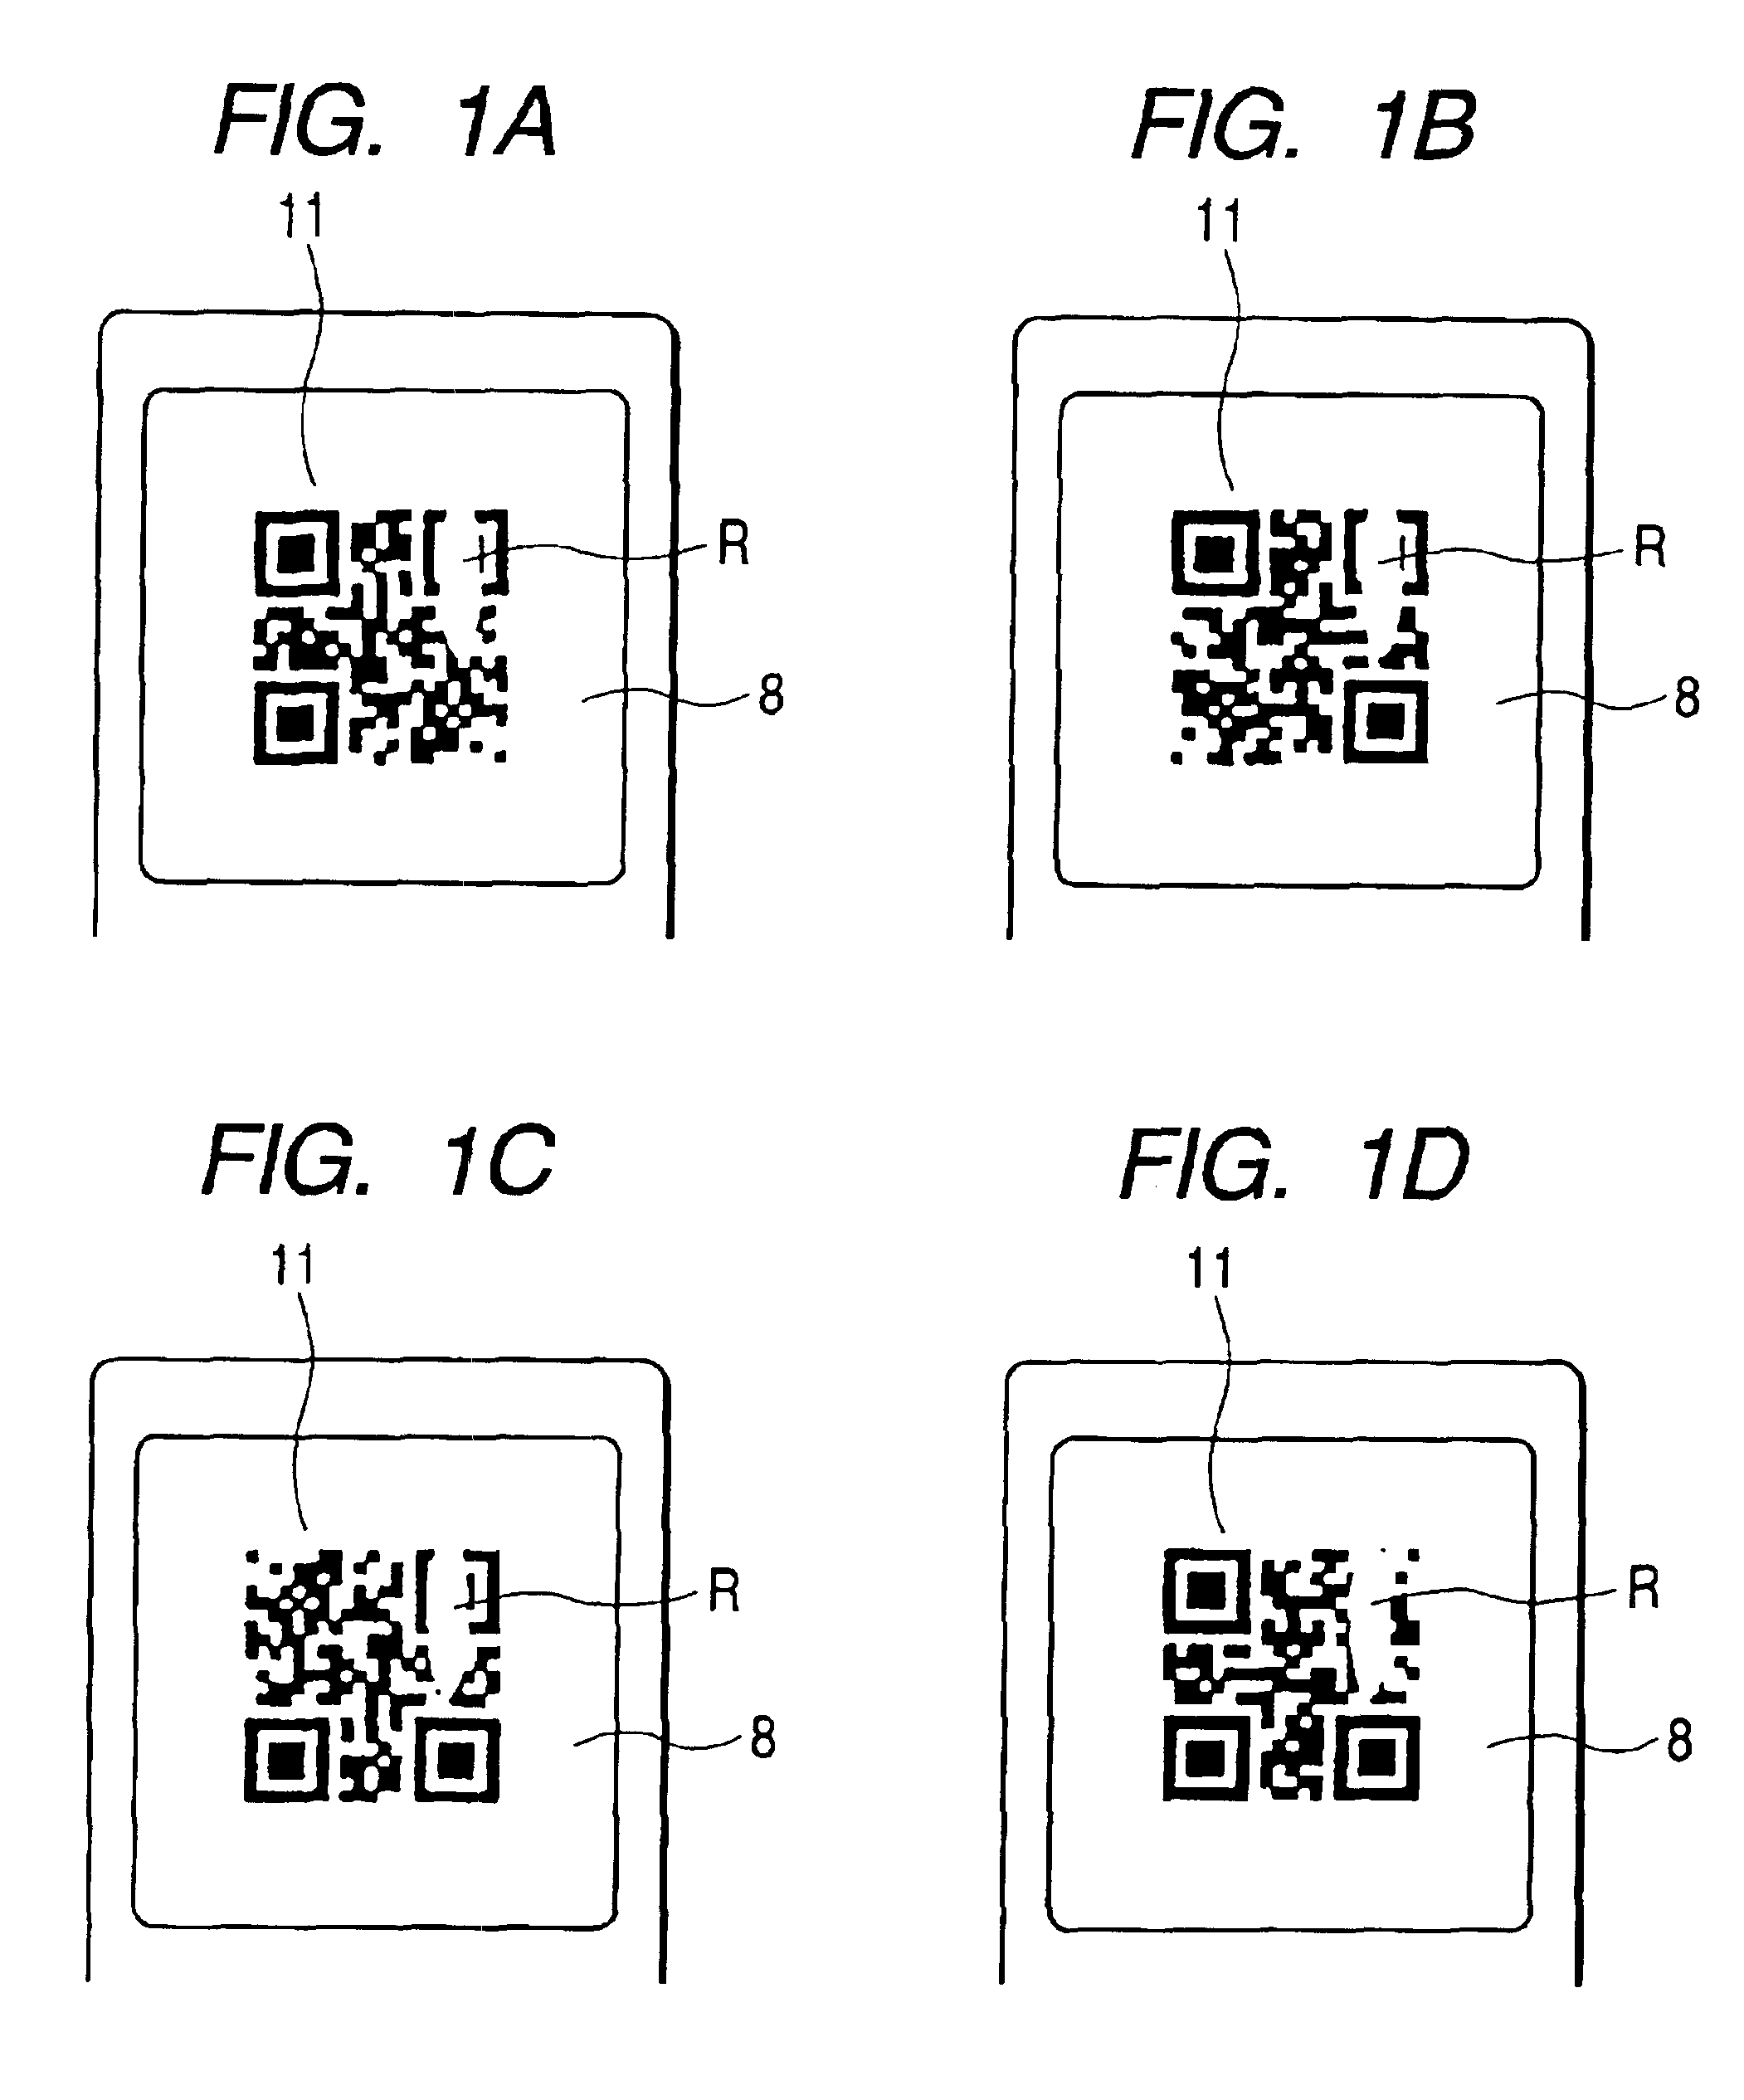 Method for displaying and reading information code for commercial transaction